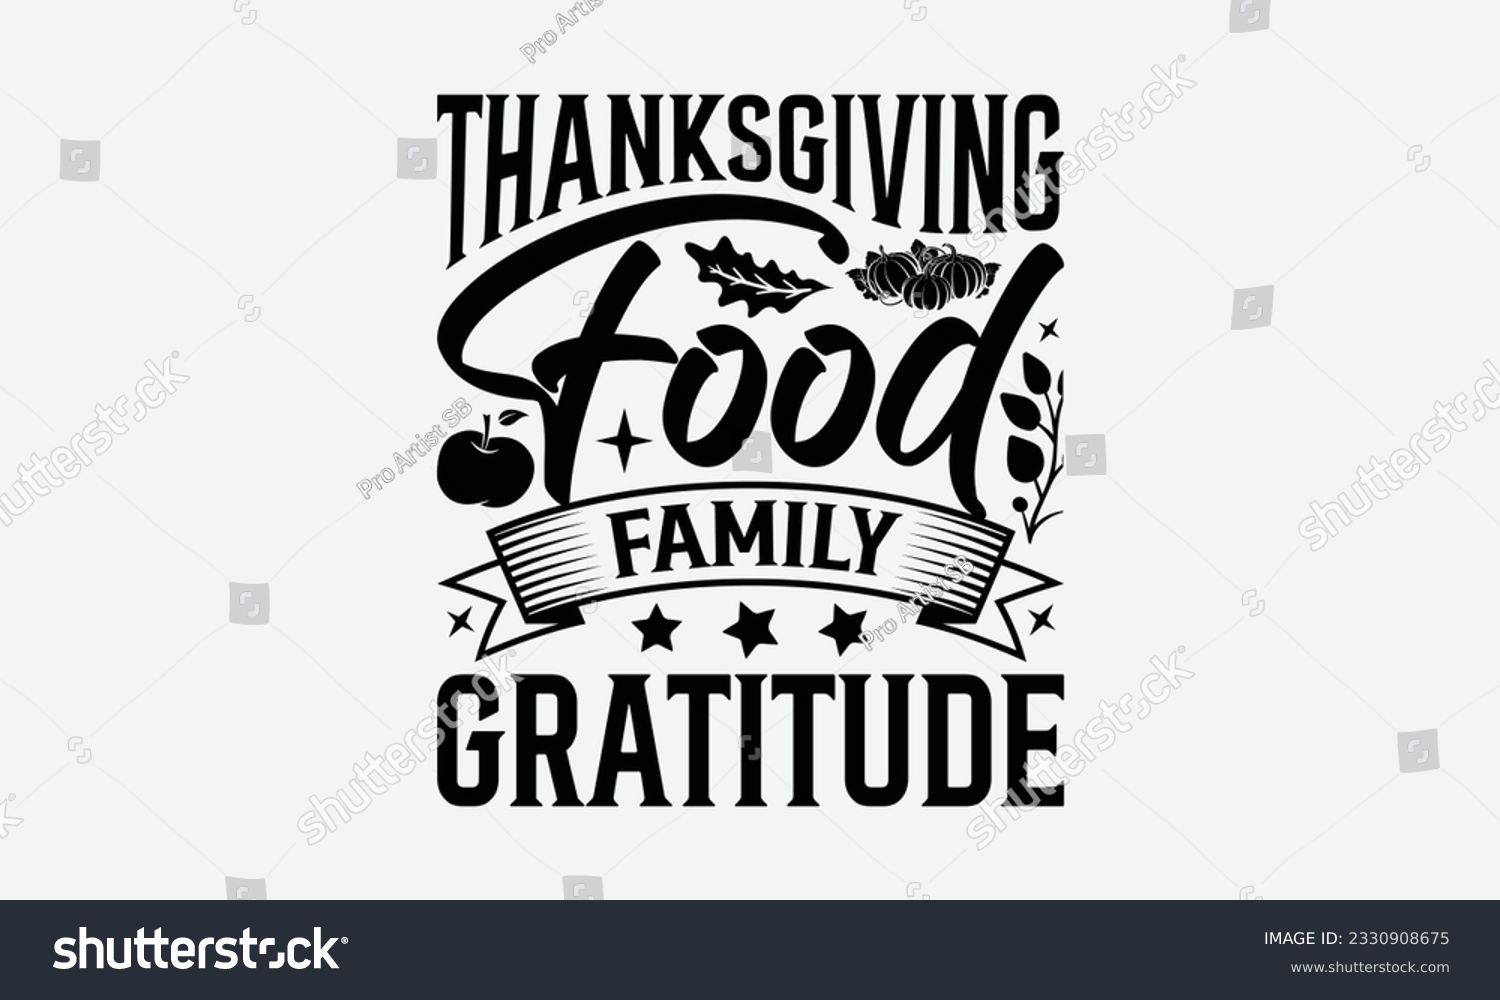 SVG of Thanksgiving Food Family Gratitude - Thanksgiving T-shirt Design Template, Happy Turkey Day SVG Quotes, Hand Drawn Lettering Phrase Isolated On White Background. svg